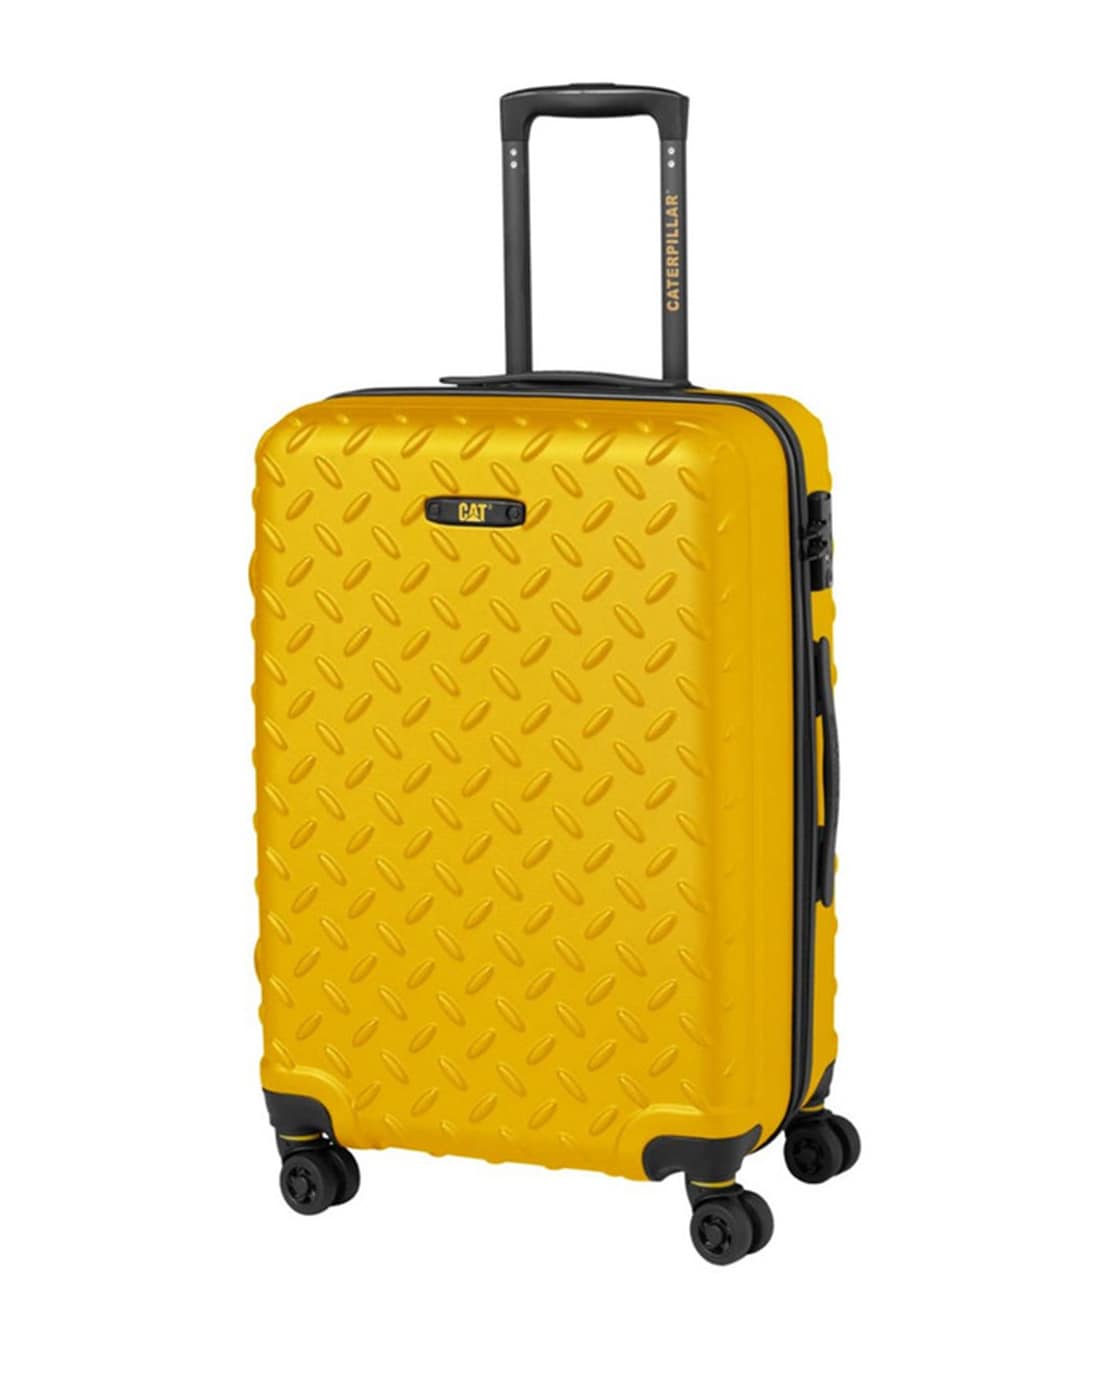 Share 69+ caterpillar trolley bags india best